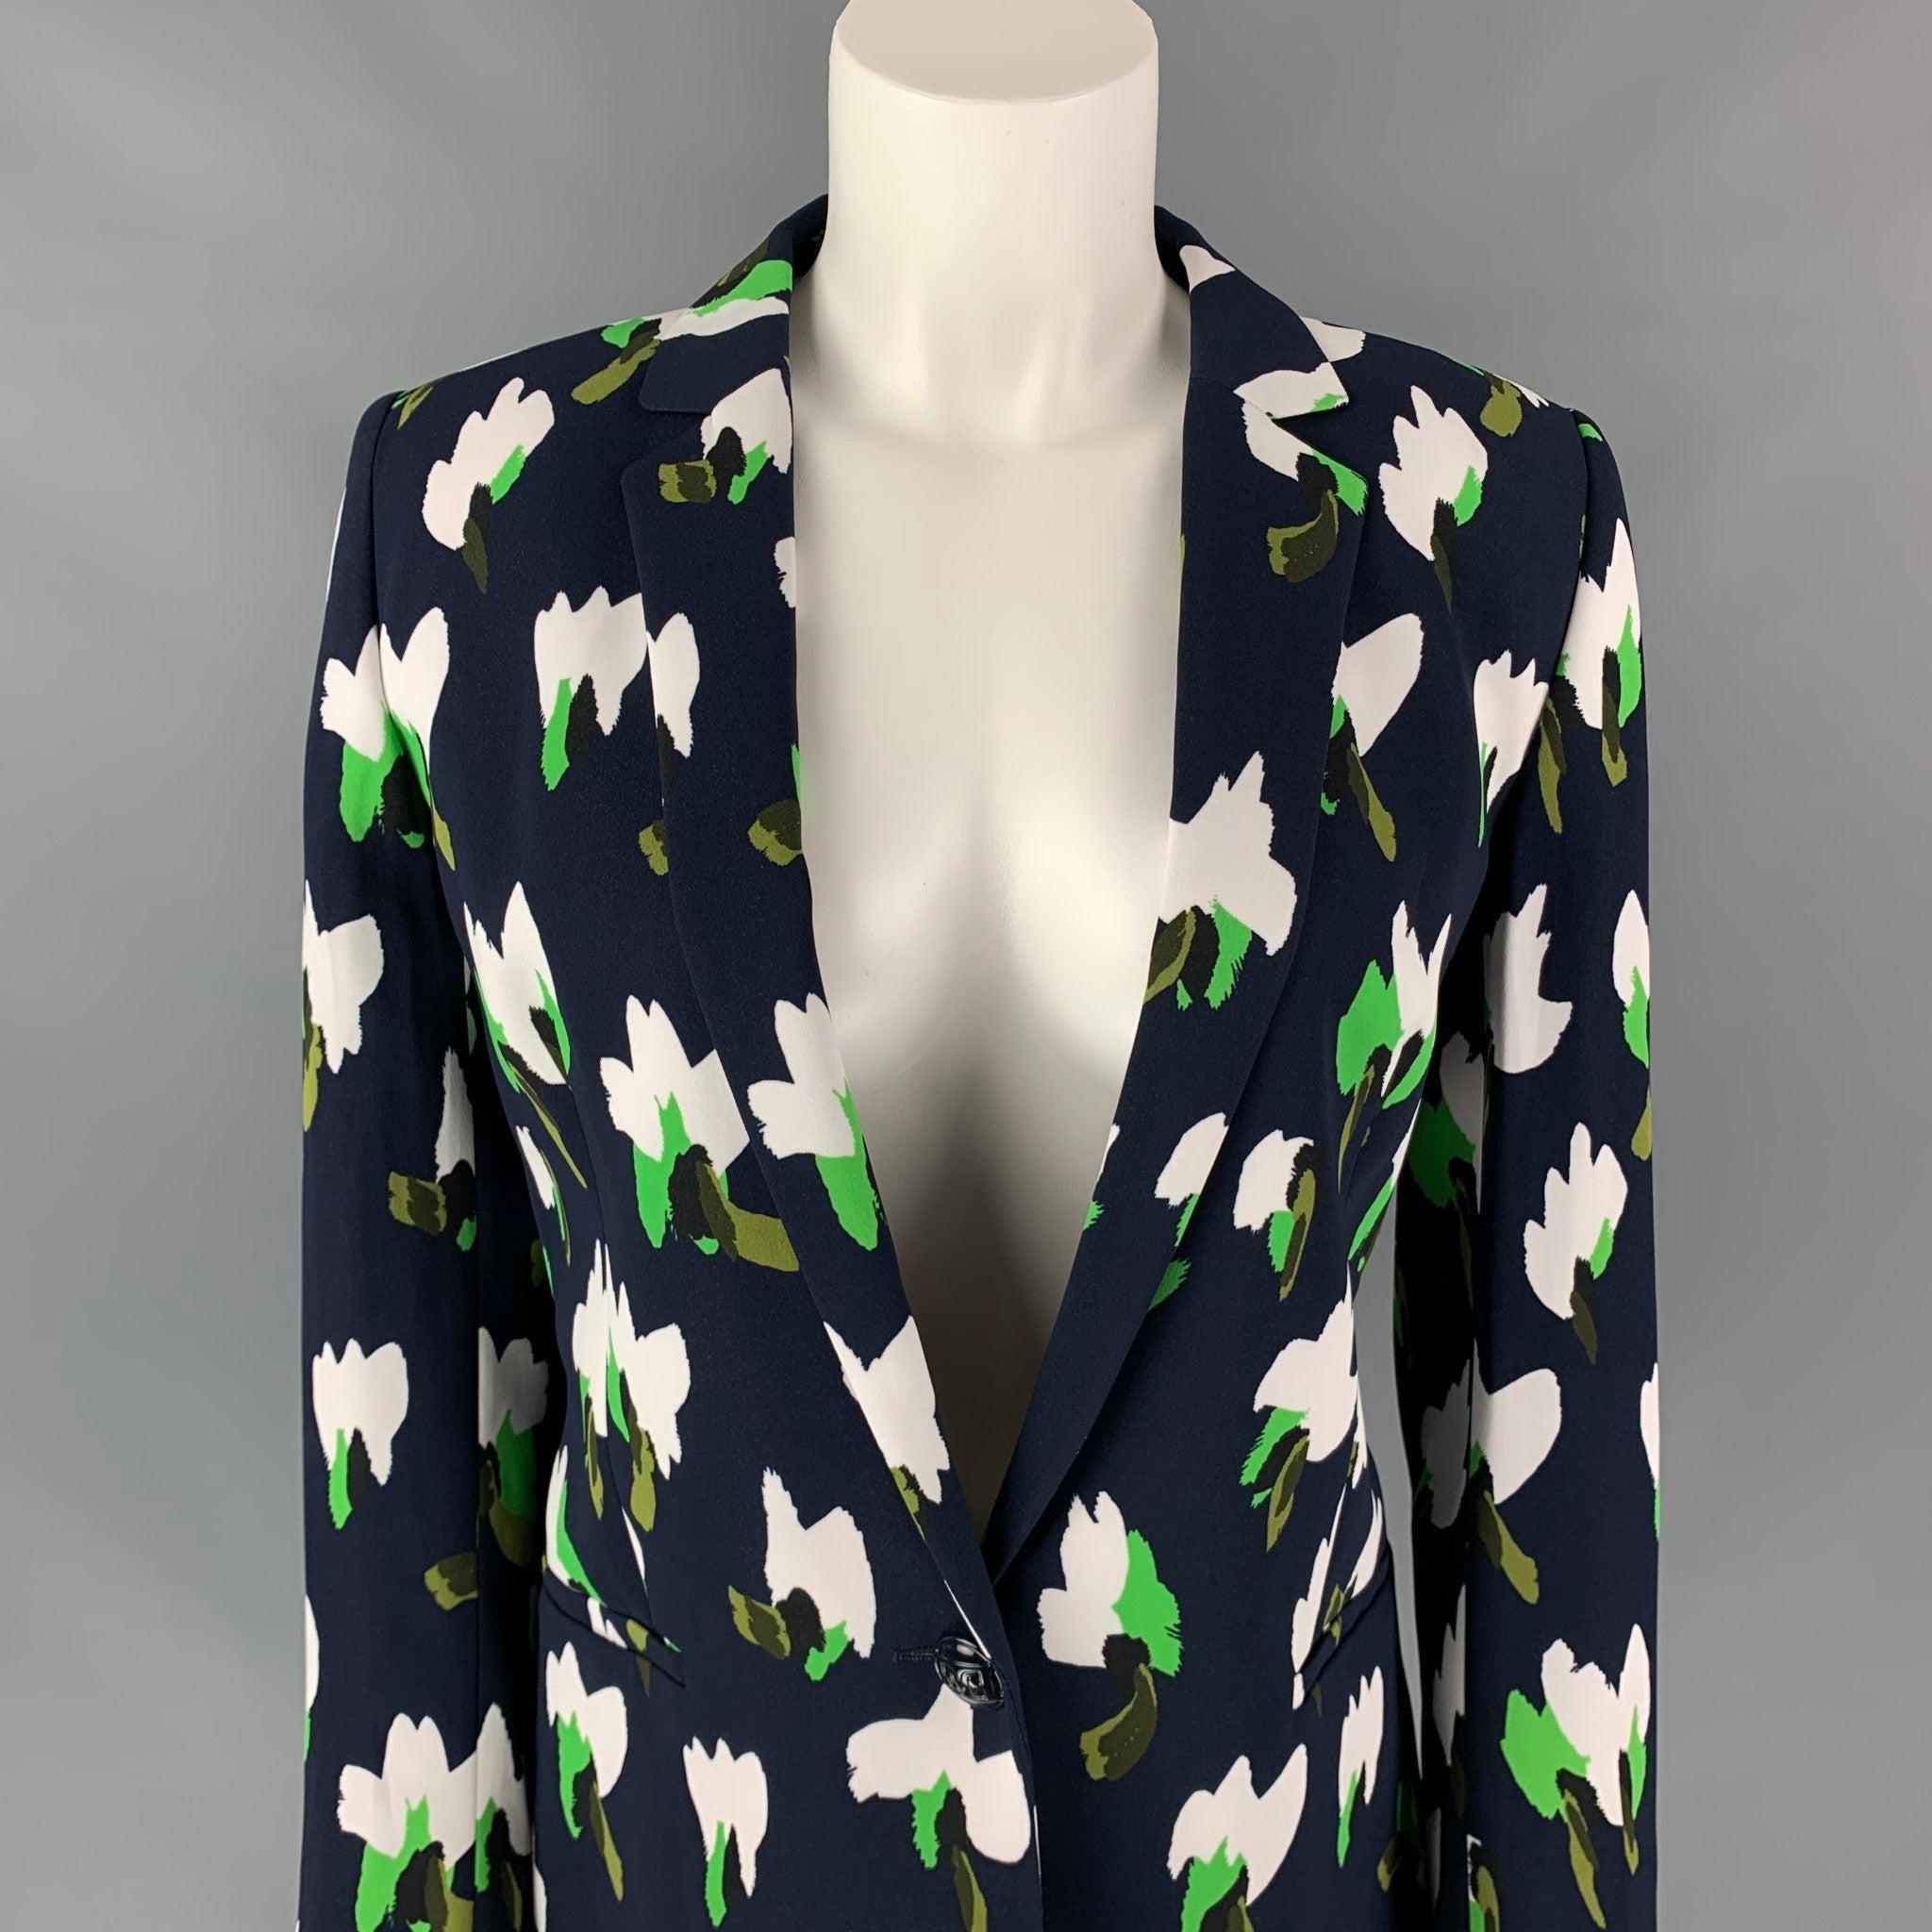 ESCADA jacket comes in a navy & white abstract print viscose with no liner featuring a oversized fit, notch lapel, slit pockets, and a single button closure. New With Tags.  

Marked:   36 

Measurements: 
 
Shoulder: 15.5 inches  Bust: 40 inches 